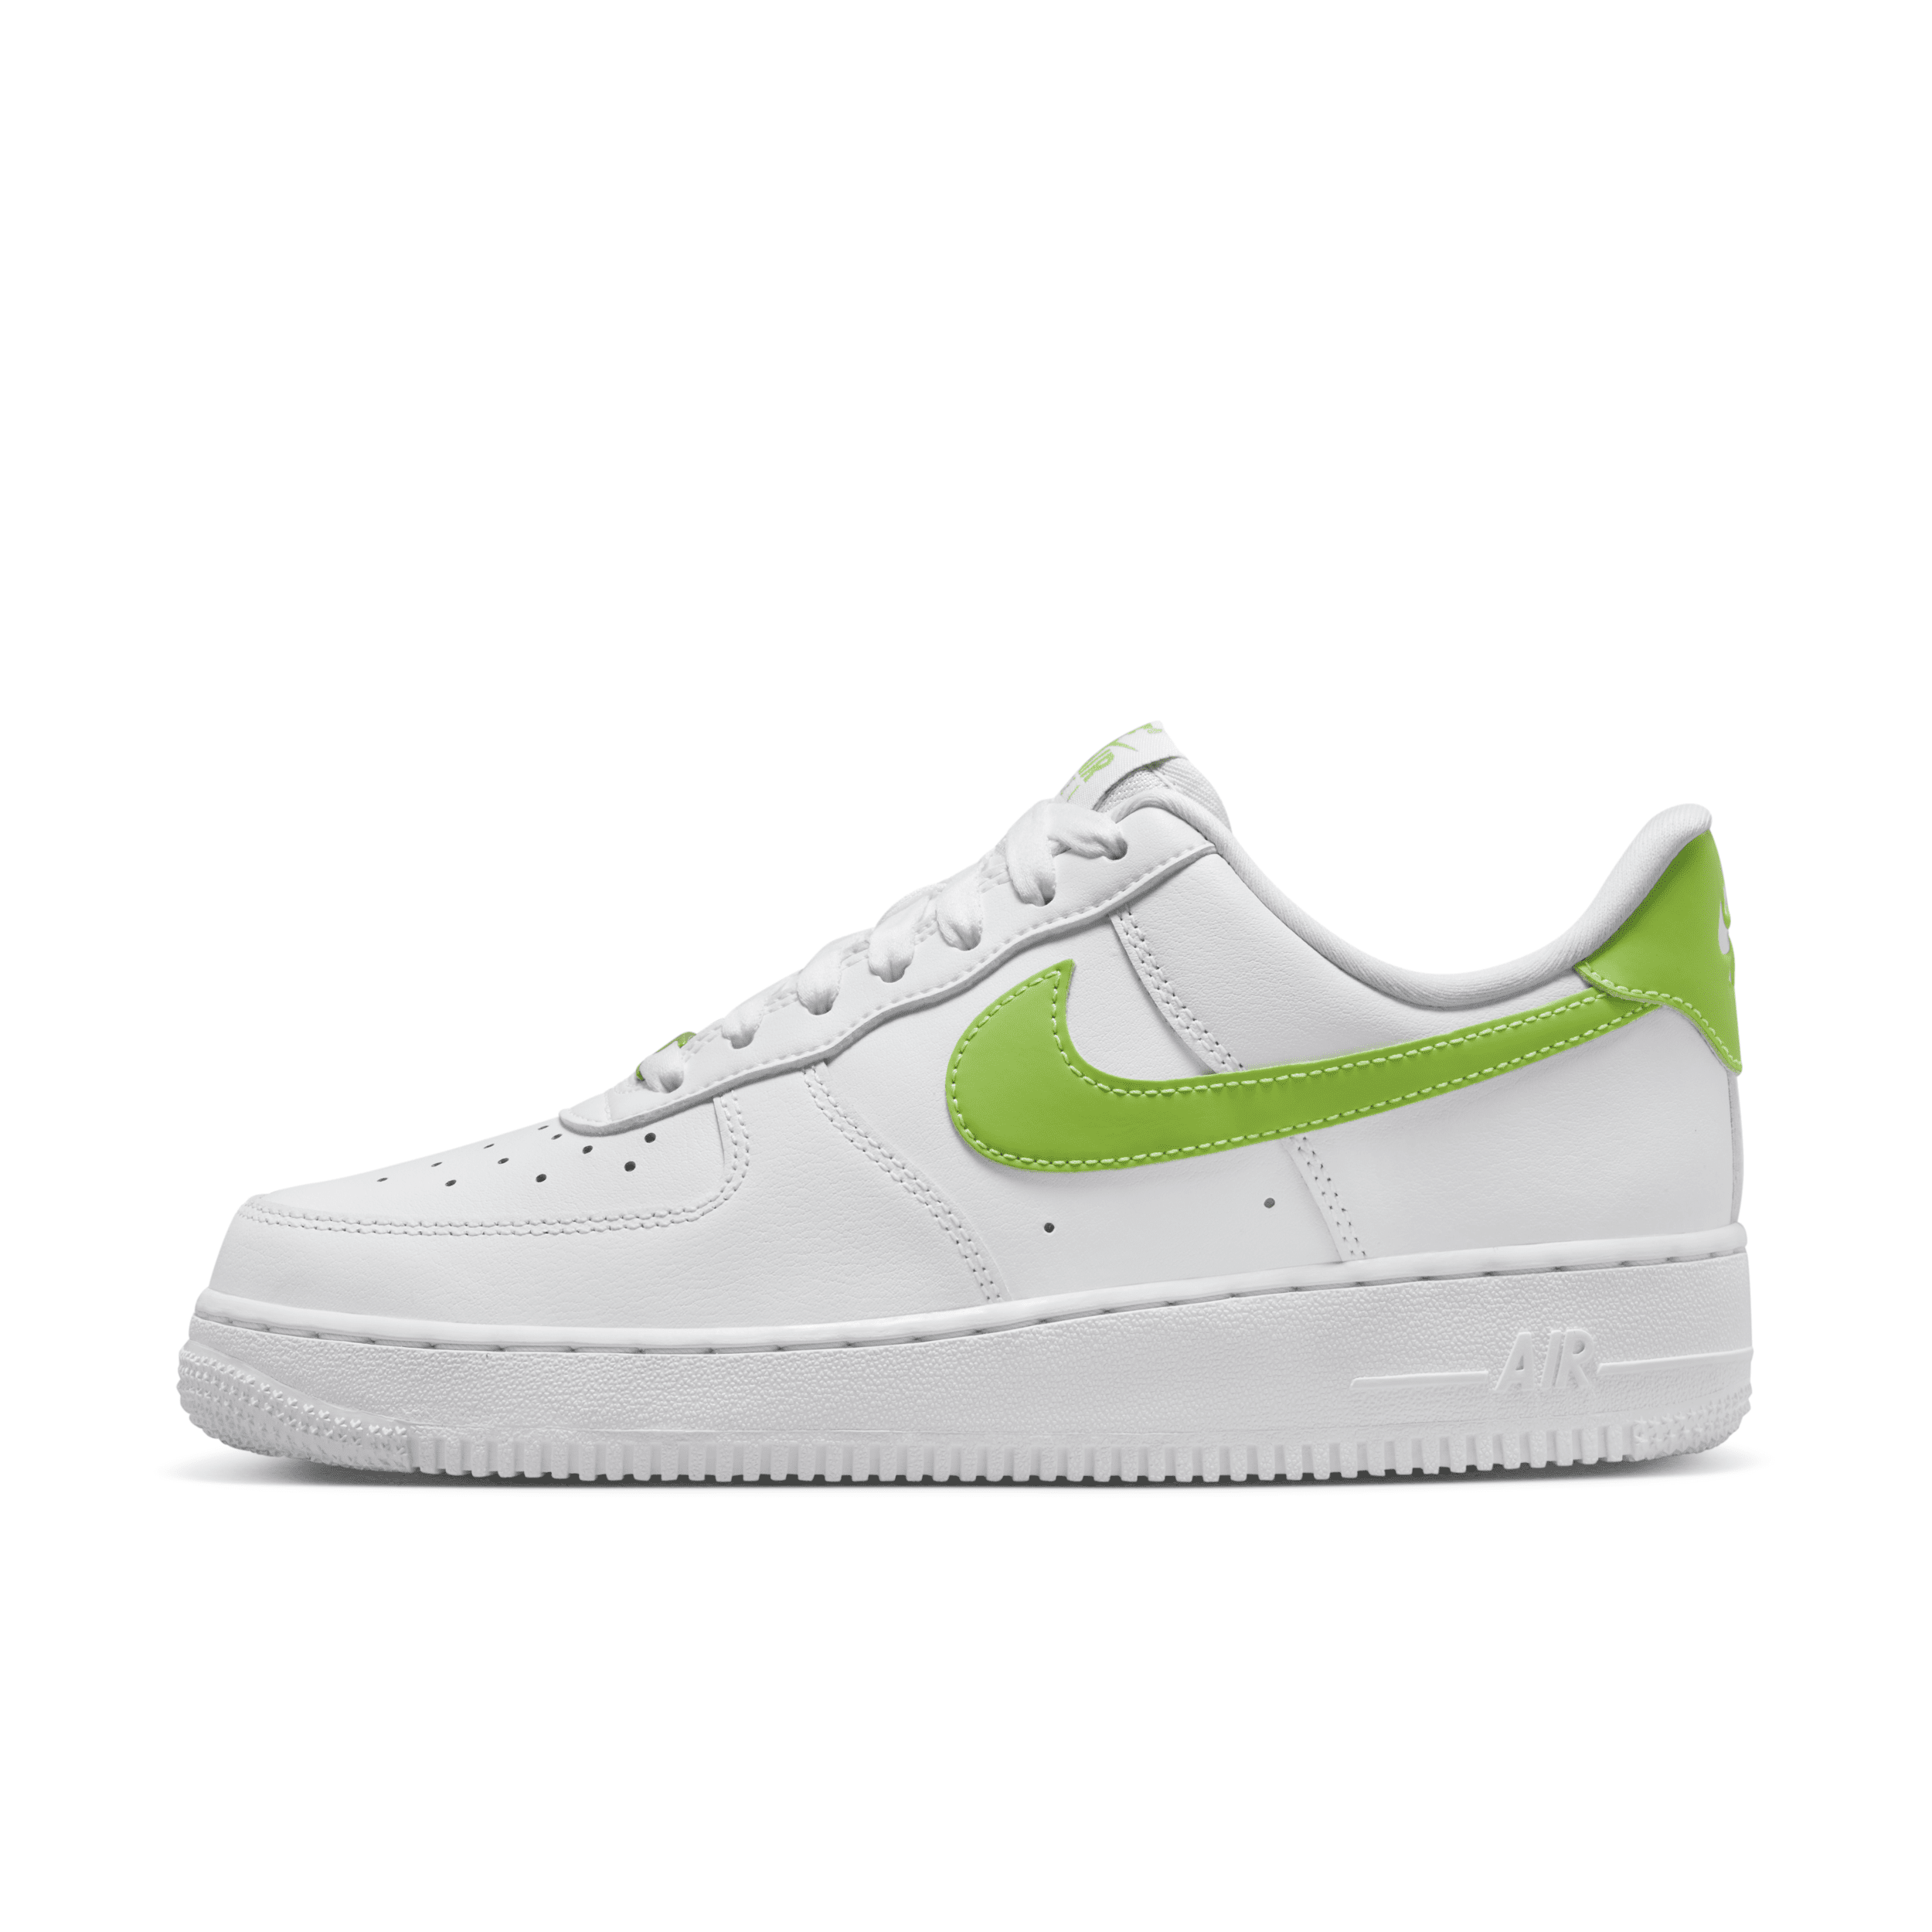 NIKE WOMEN'S AIR FORCE 1 '07 SHOES,1010069986